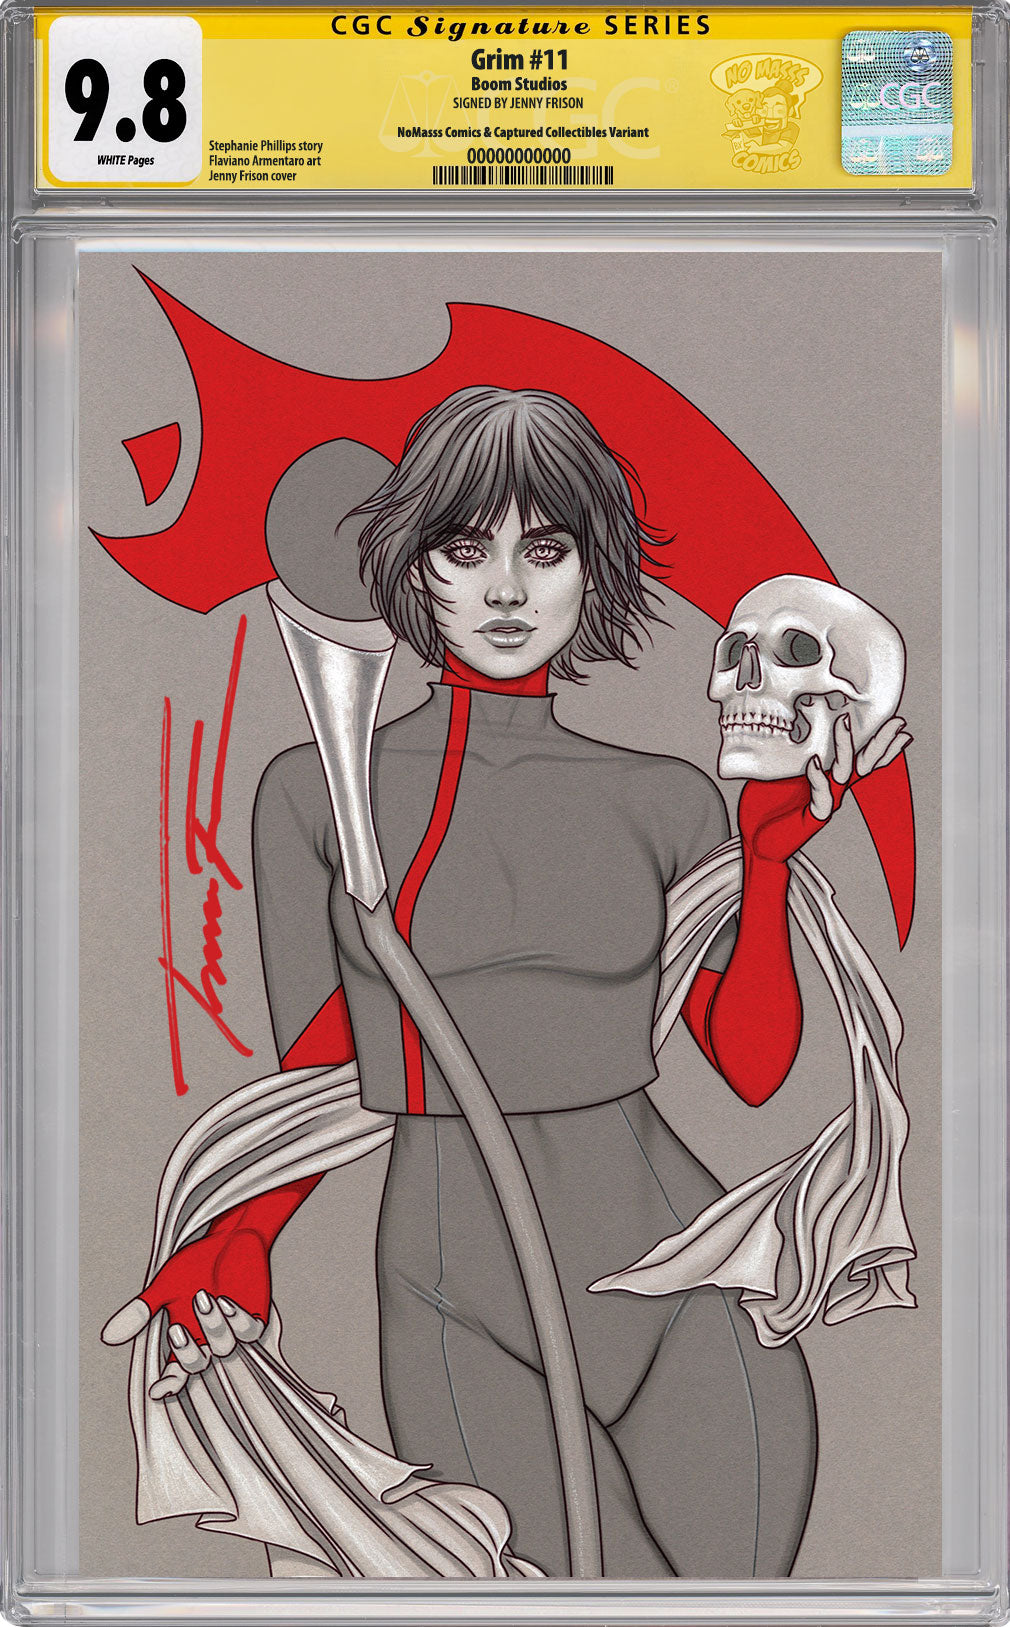 GRIM #11 SDCC EXCLUSIVE CGC SS SIGNED BY JENNY FRISON